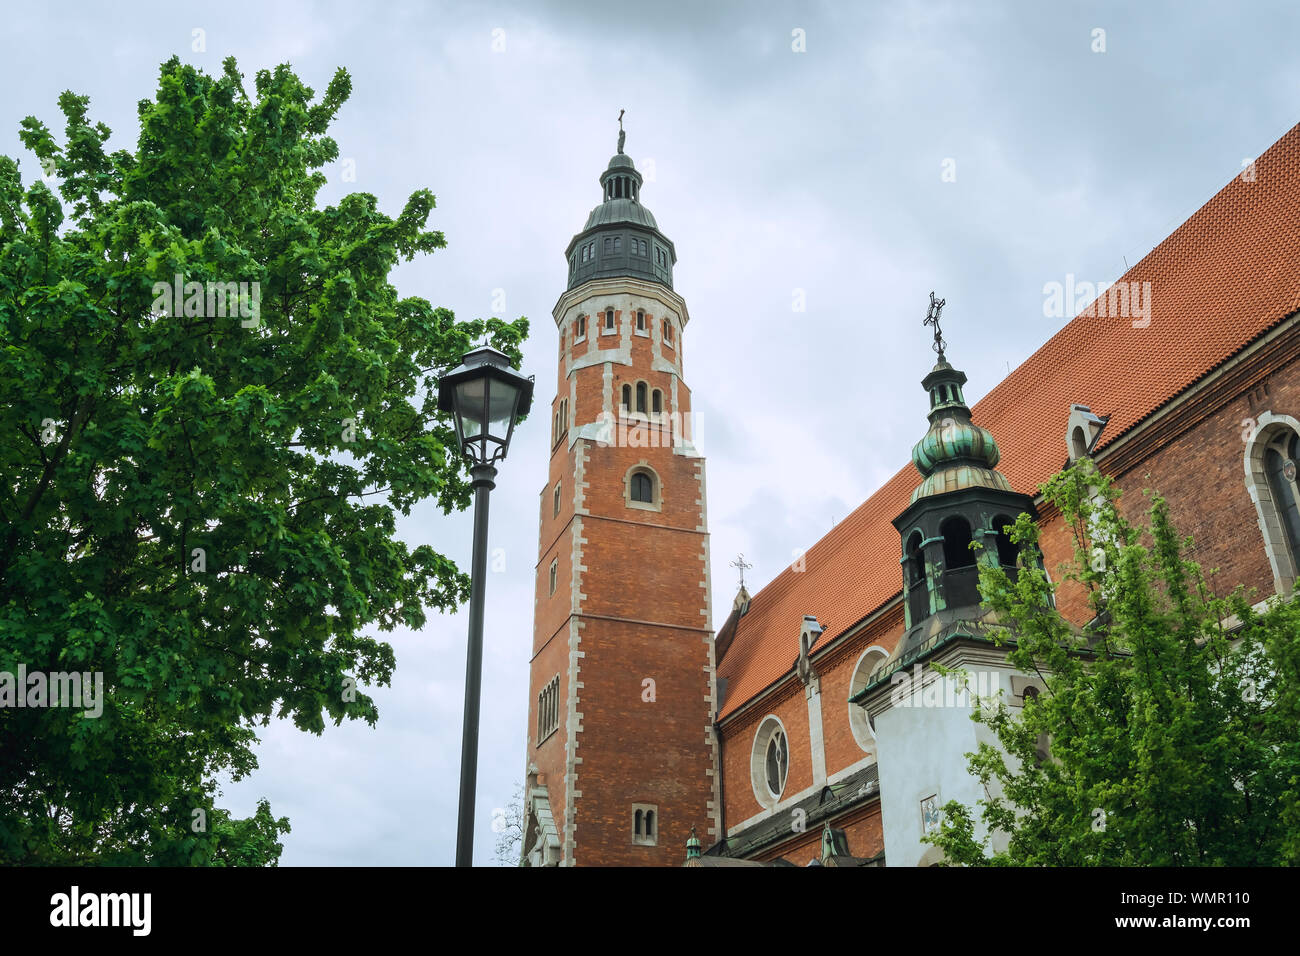 Historic city of Krakow in Poland. The streets of old Krakow, Poland. Unusual tower in the city Stock Photo